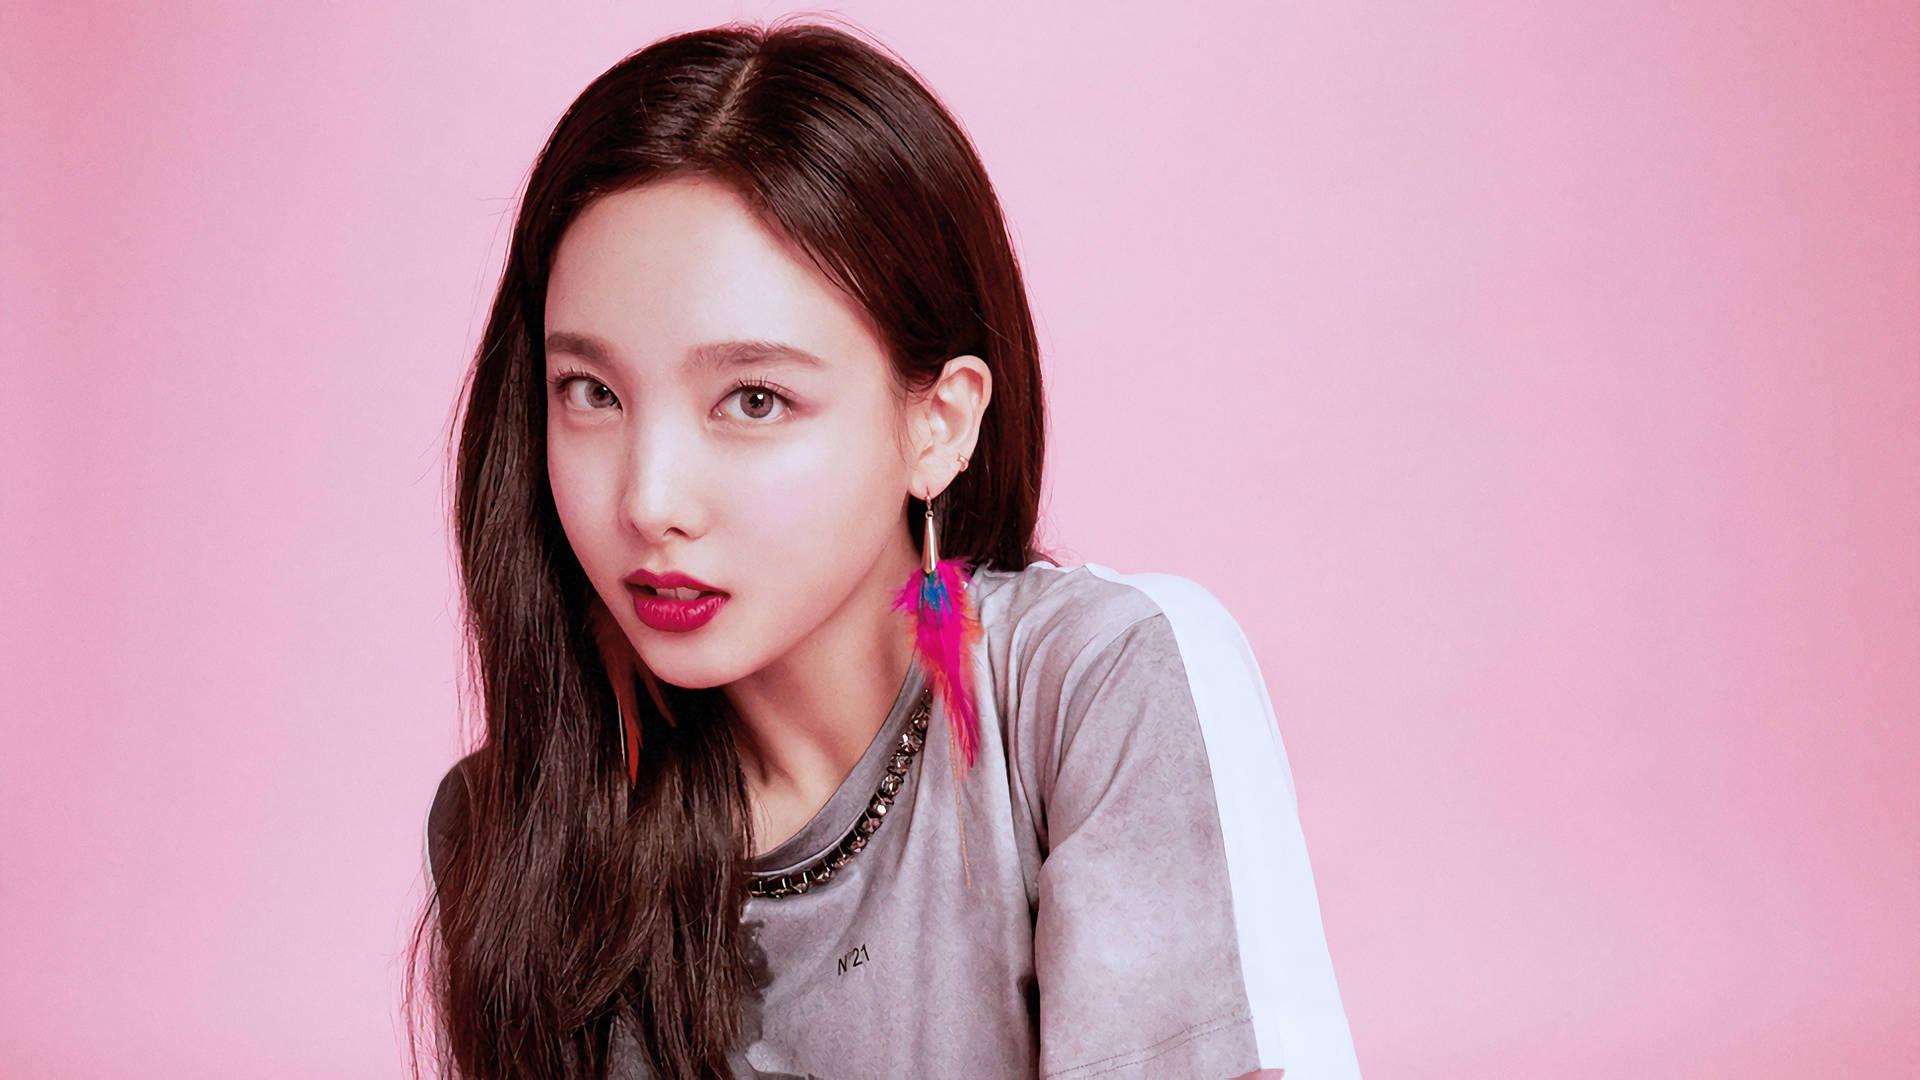 Twice Nayeon With A Feather Earring Wallpaper